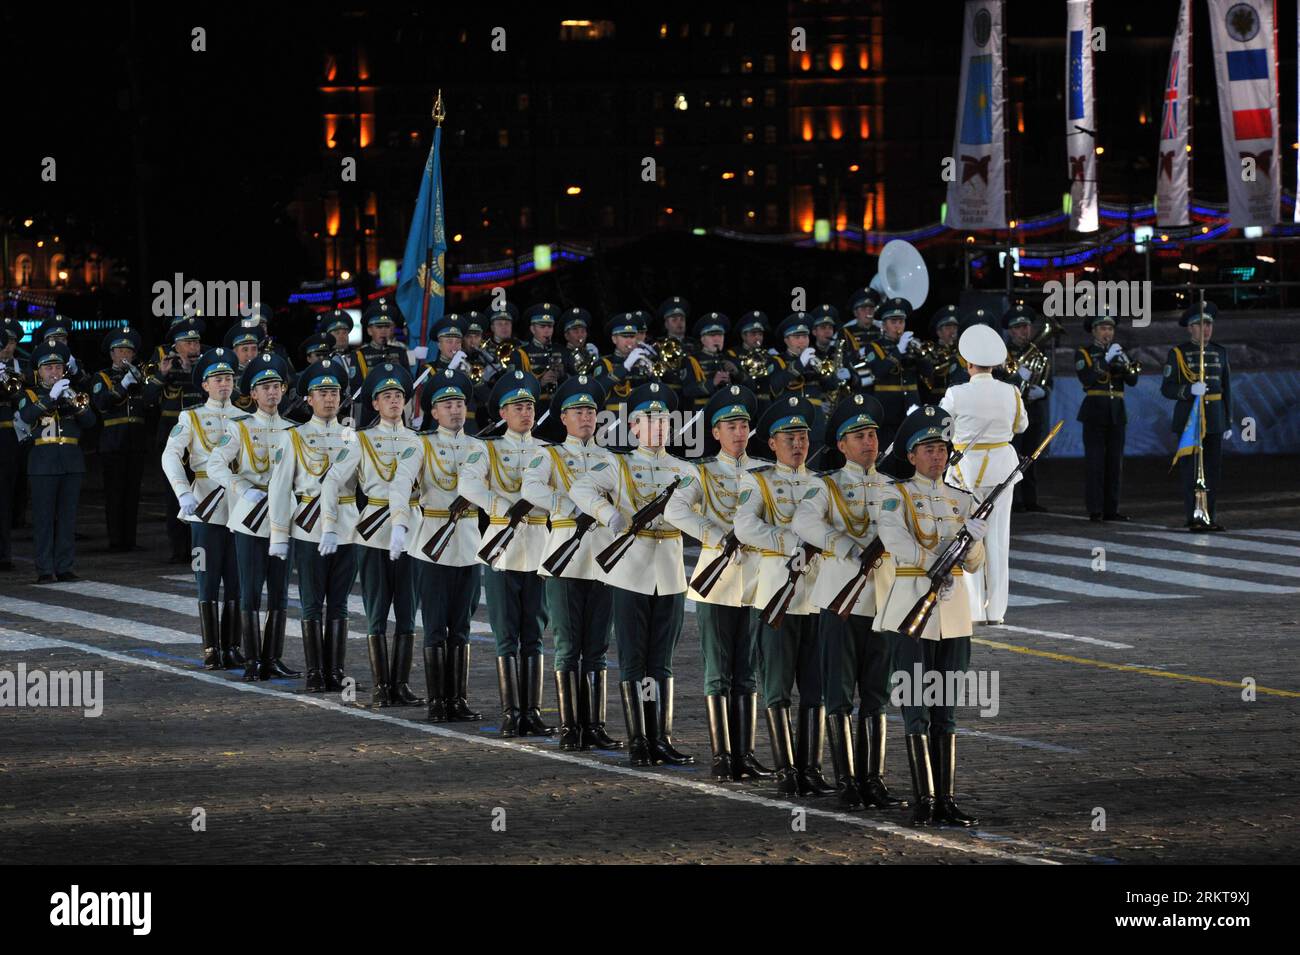 Bildnummer: 58416191  Datum: 01.09.2012  Copyright: imago/Xinhua  MOSCOW,  2012 (Xinhua) -- A team performs during the International Military Music Festival at Red Square in Moscow, on Sept. 1, 2012. Military bands from different countries participate in the annual tattoo. (Xinhua/Pavel) (lr) RUSSIA-MOSCOW-INTERNATIONAL MILITARY MUSIC FESTIVAL PUBLICATIONxNOTxINxCHN Gesellschaft Militär Musik Militärmusik Musikfestival Militärmusikfestival xas x0x premiumd 2012 quer     58416191 Date 01 09 2012 Copyright Imago XINHUA Moscow 2012 XINHUA a Team performs during The International Military Music Fe Stock Photo